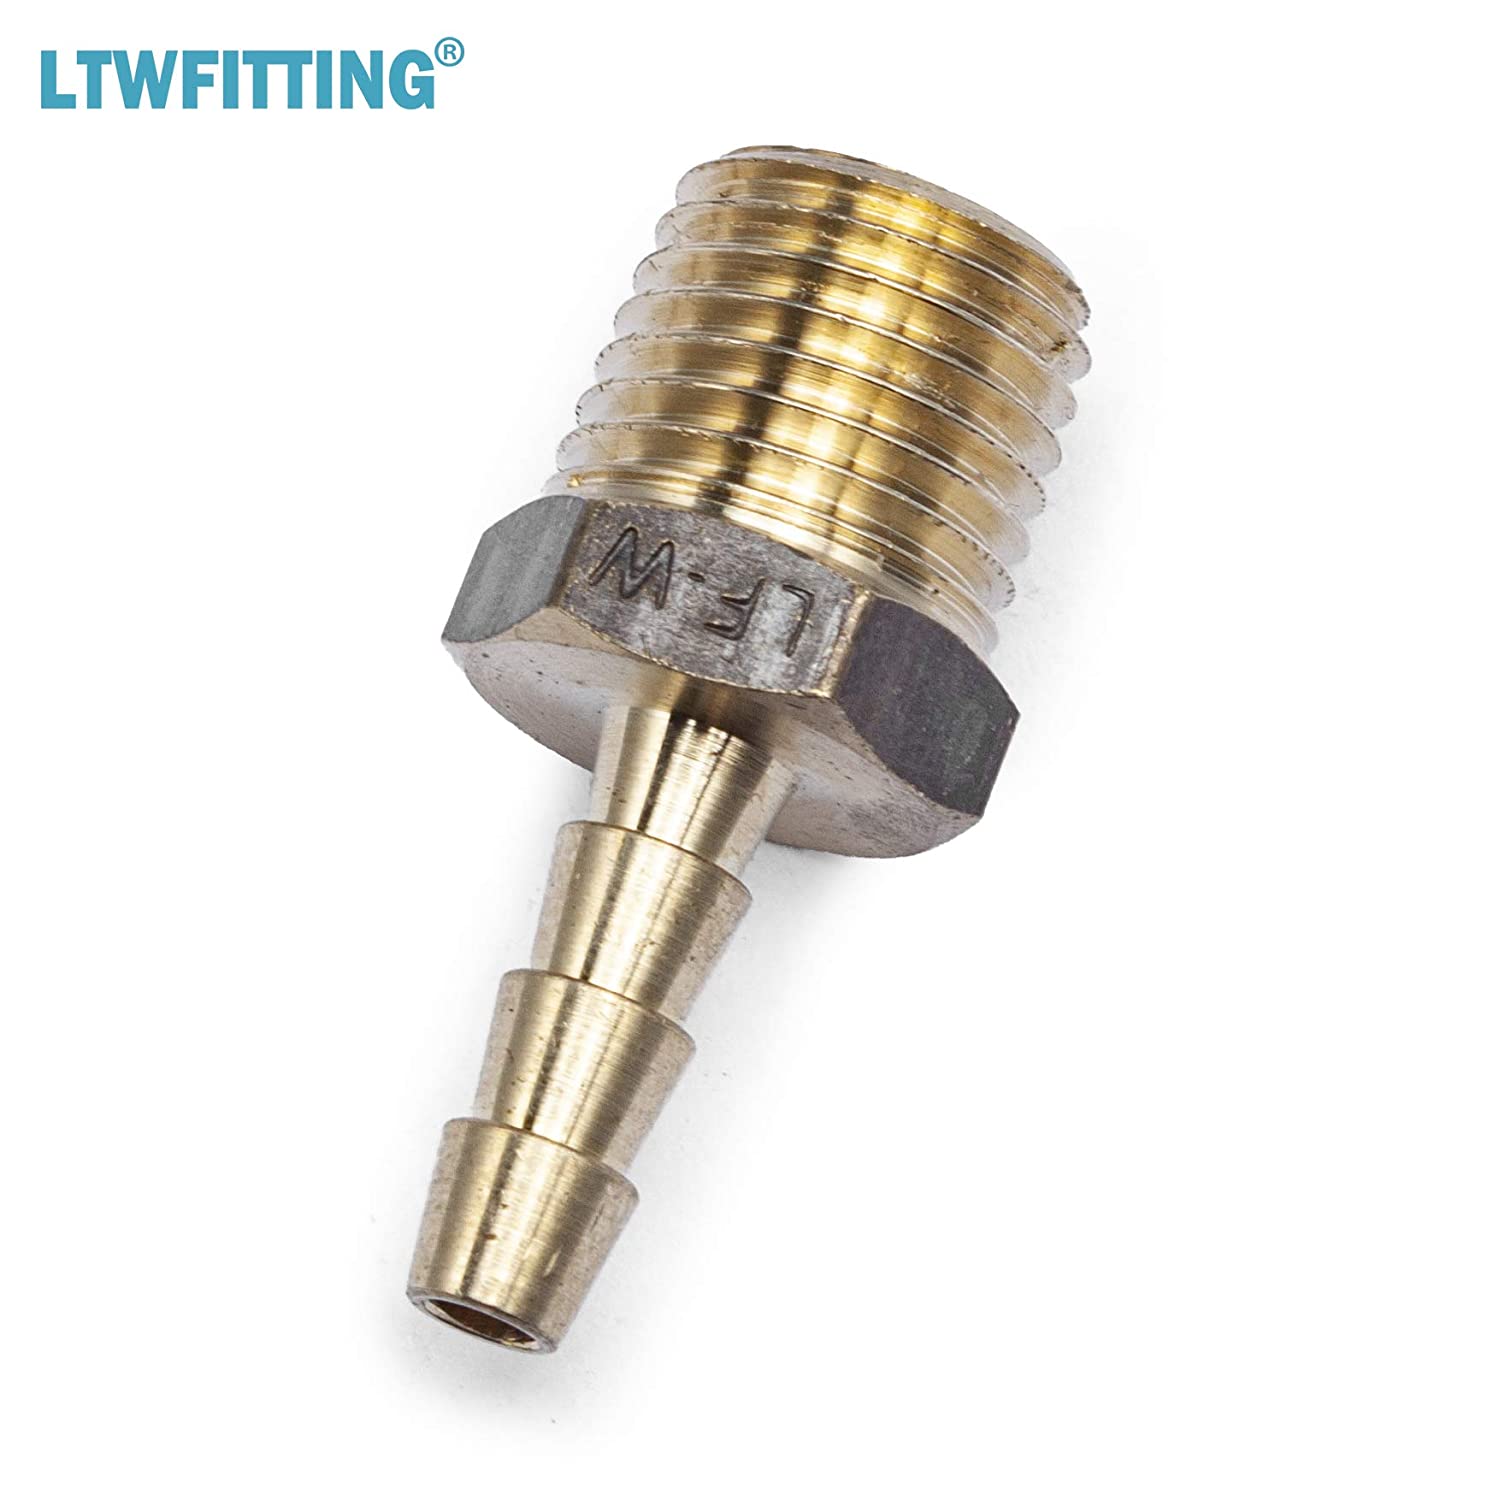 LTWFITTING Brass Barb Fitting Coupler/Connector 1/4-Inch Hose ID x 3/8-Inch Male NPT Fuel(Pack of 20)